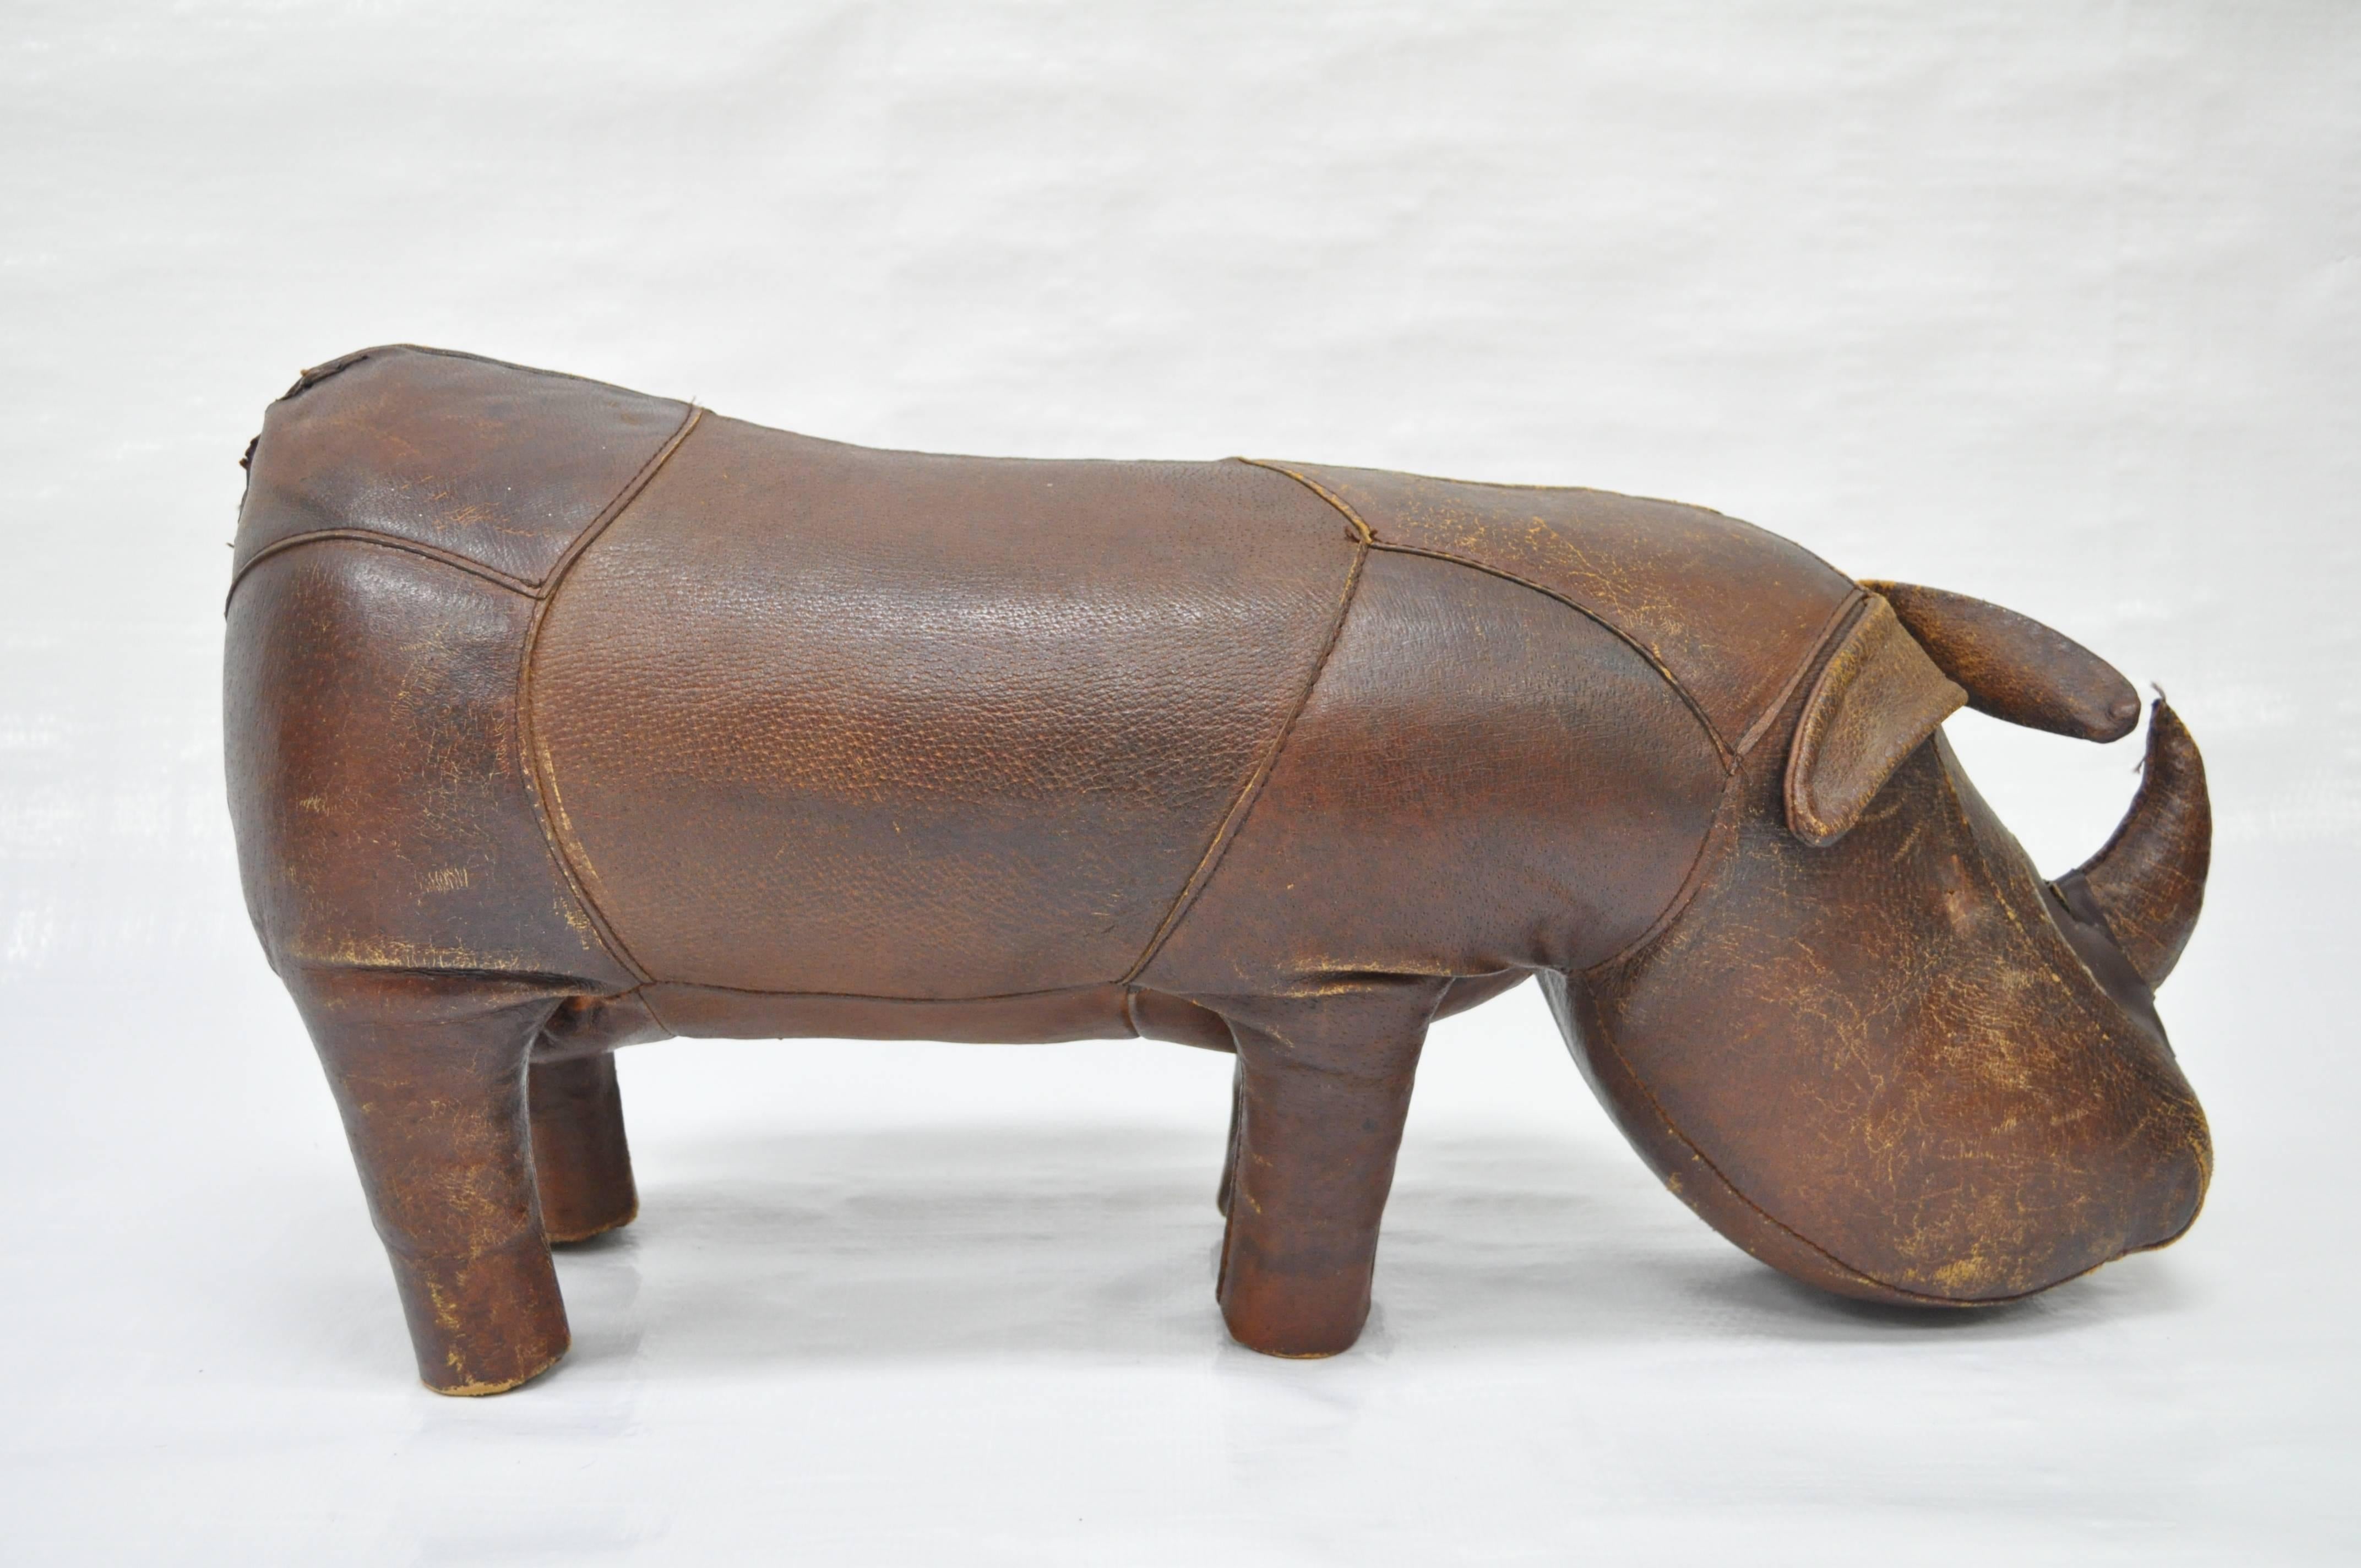 Vintage 1970s distressed brown leather rhino footstool or decorative object by Sarreid. Great quality hand stitched football leather. Metal stud feet. Made in Spain.